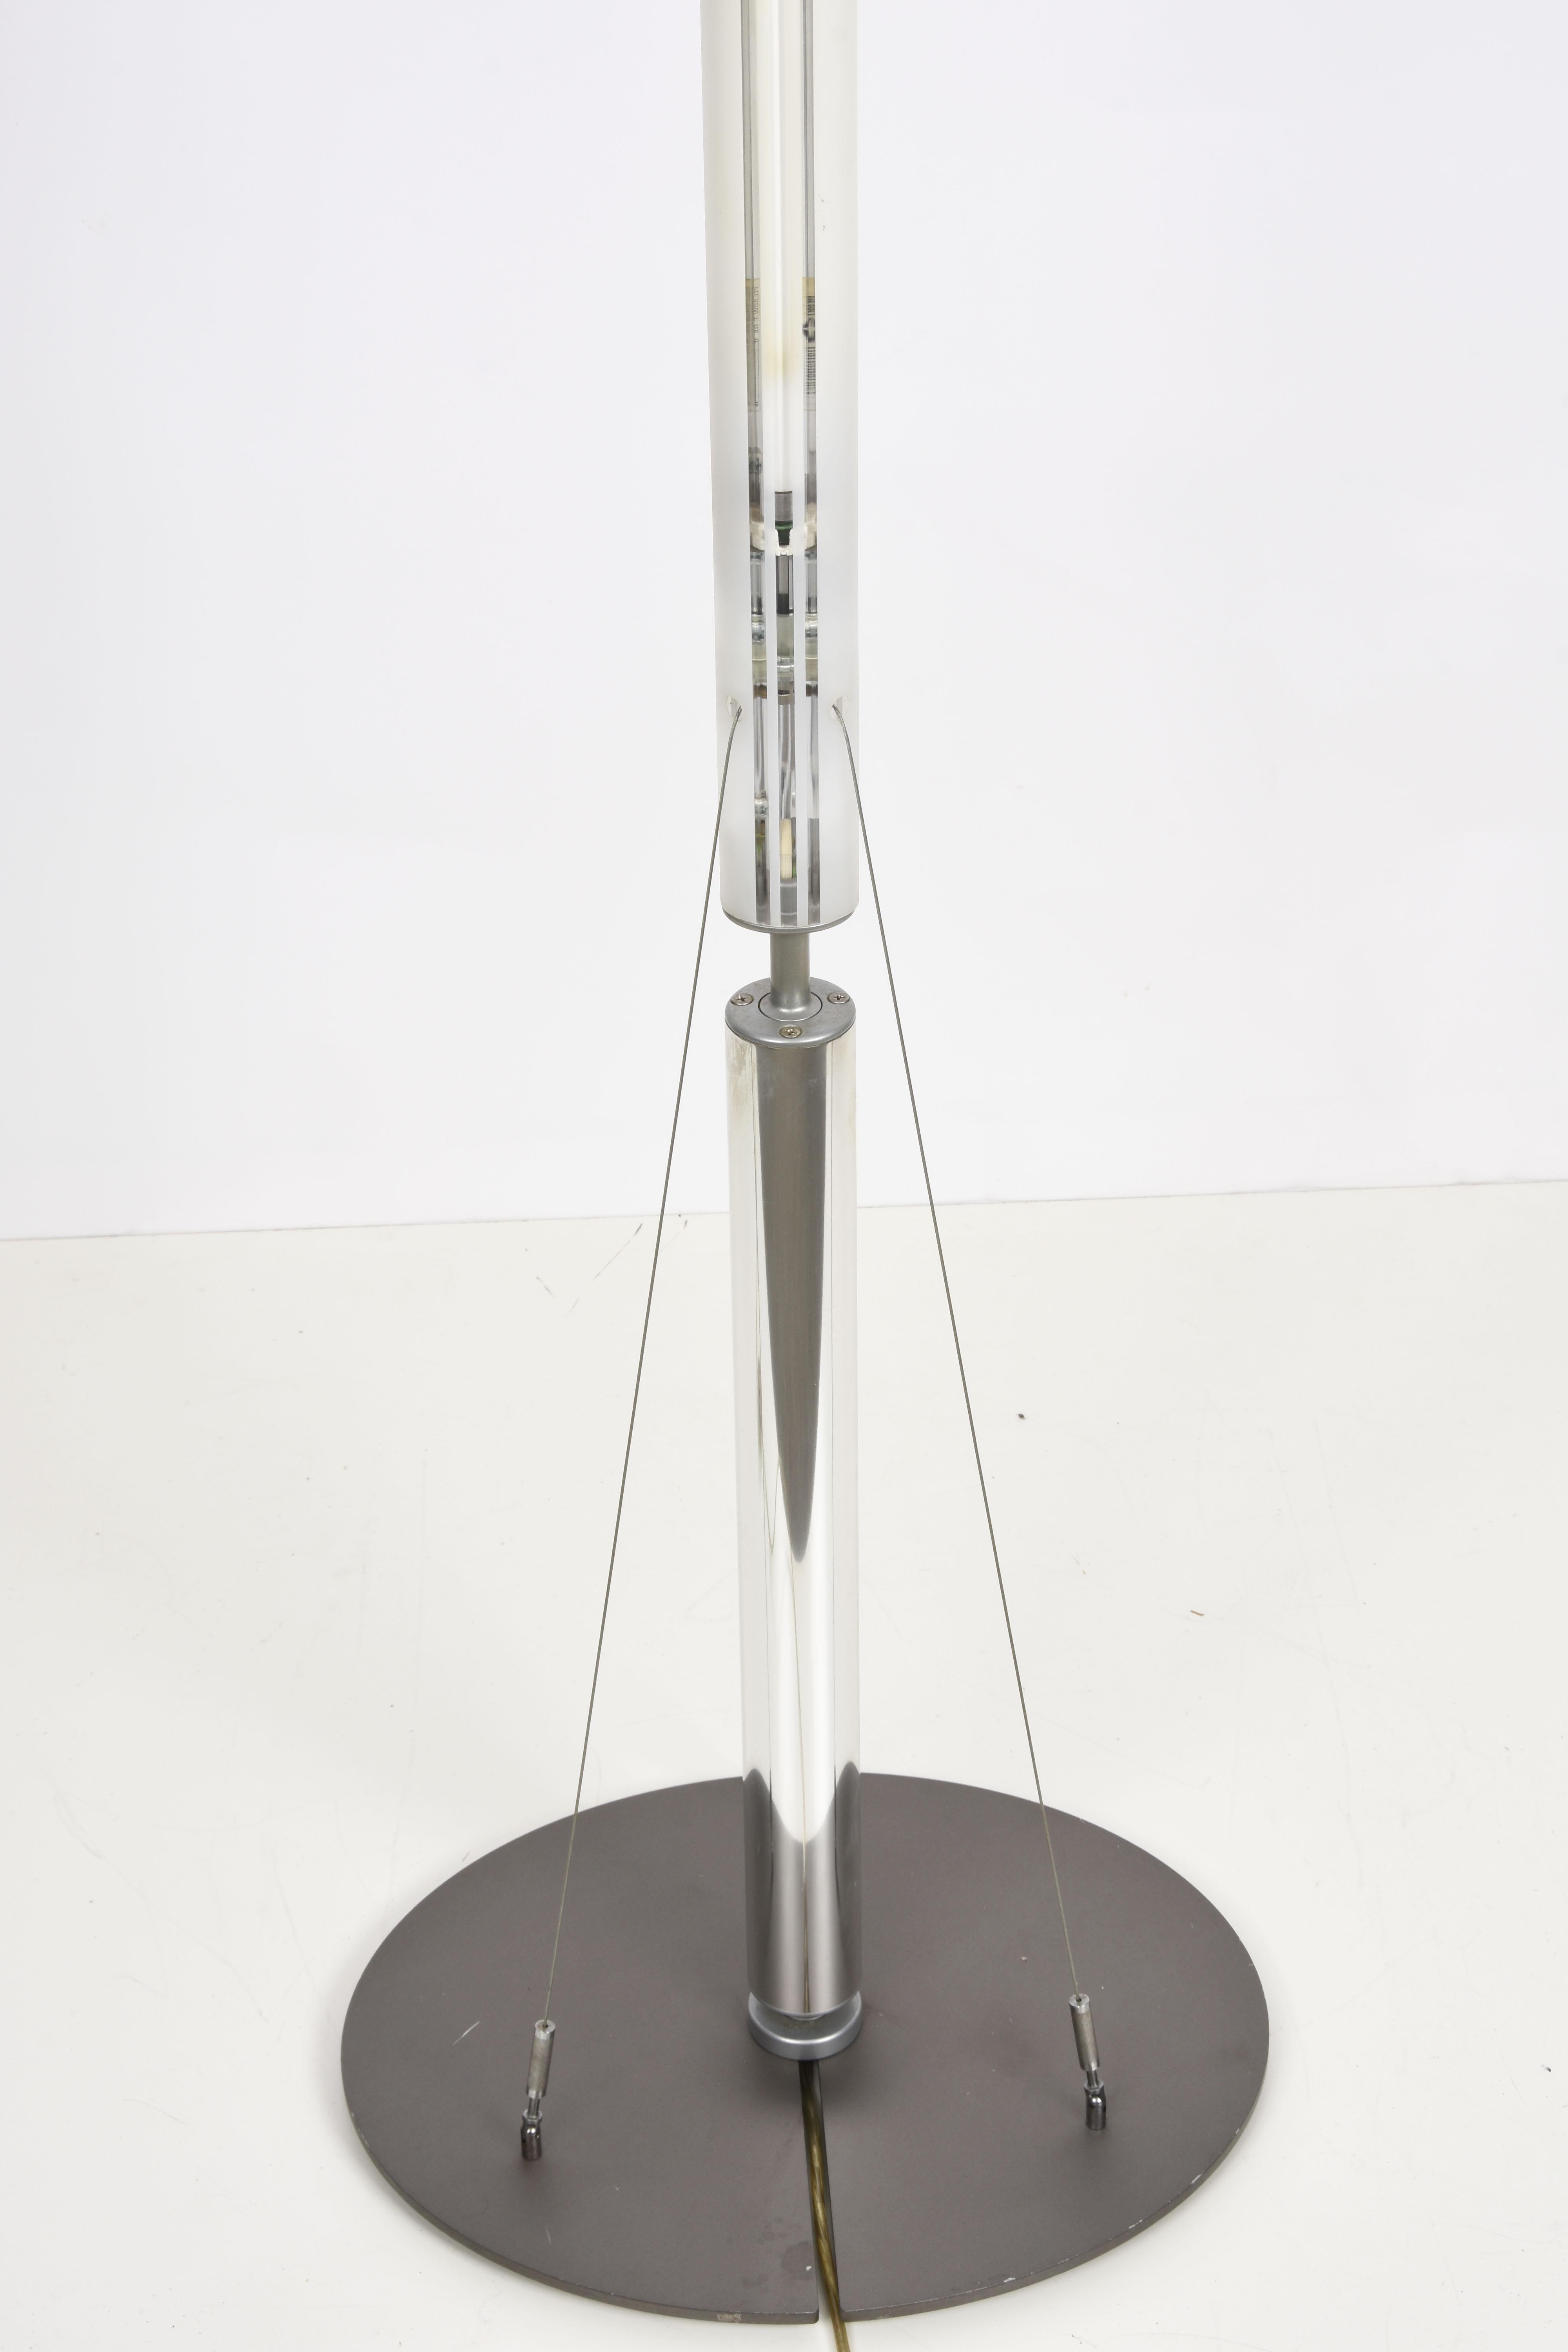 20th Century Fassina & Forcolini Midcentury Chrome Floor Lamp for Italiana Luce, Italy, 1980s For Sale